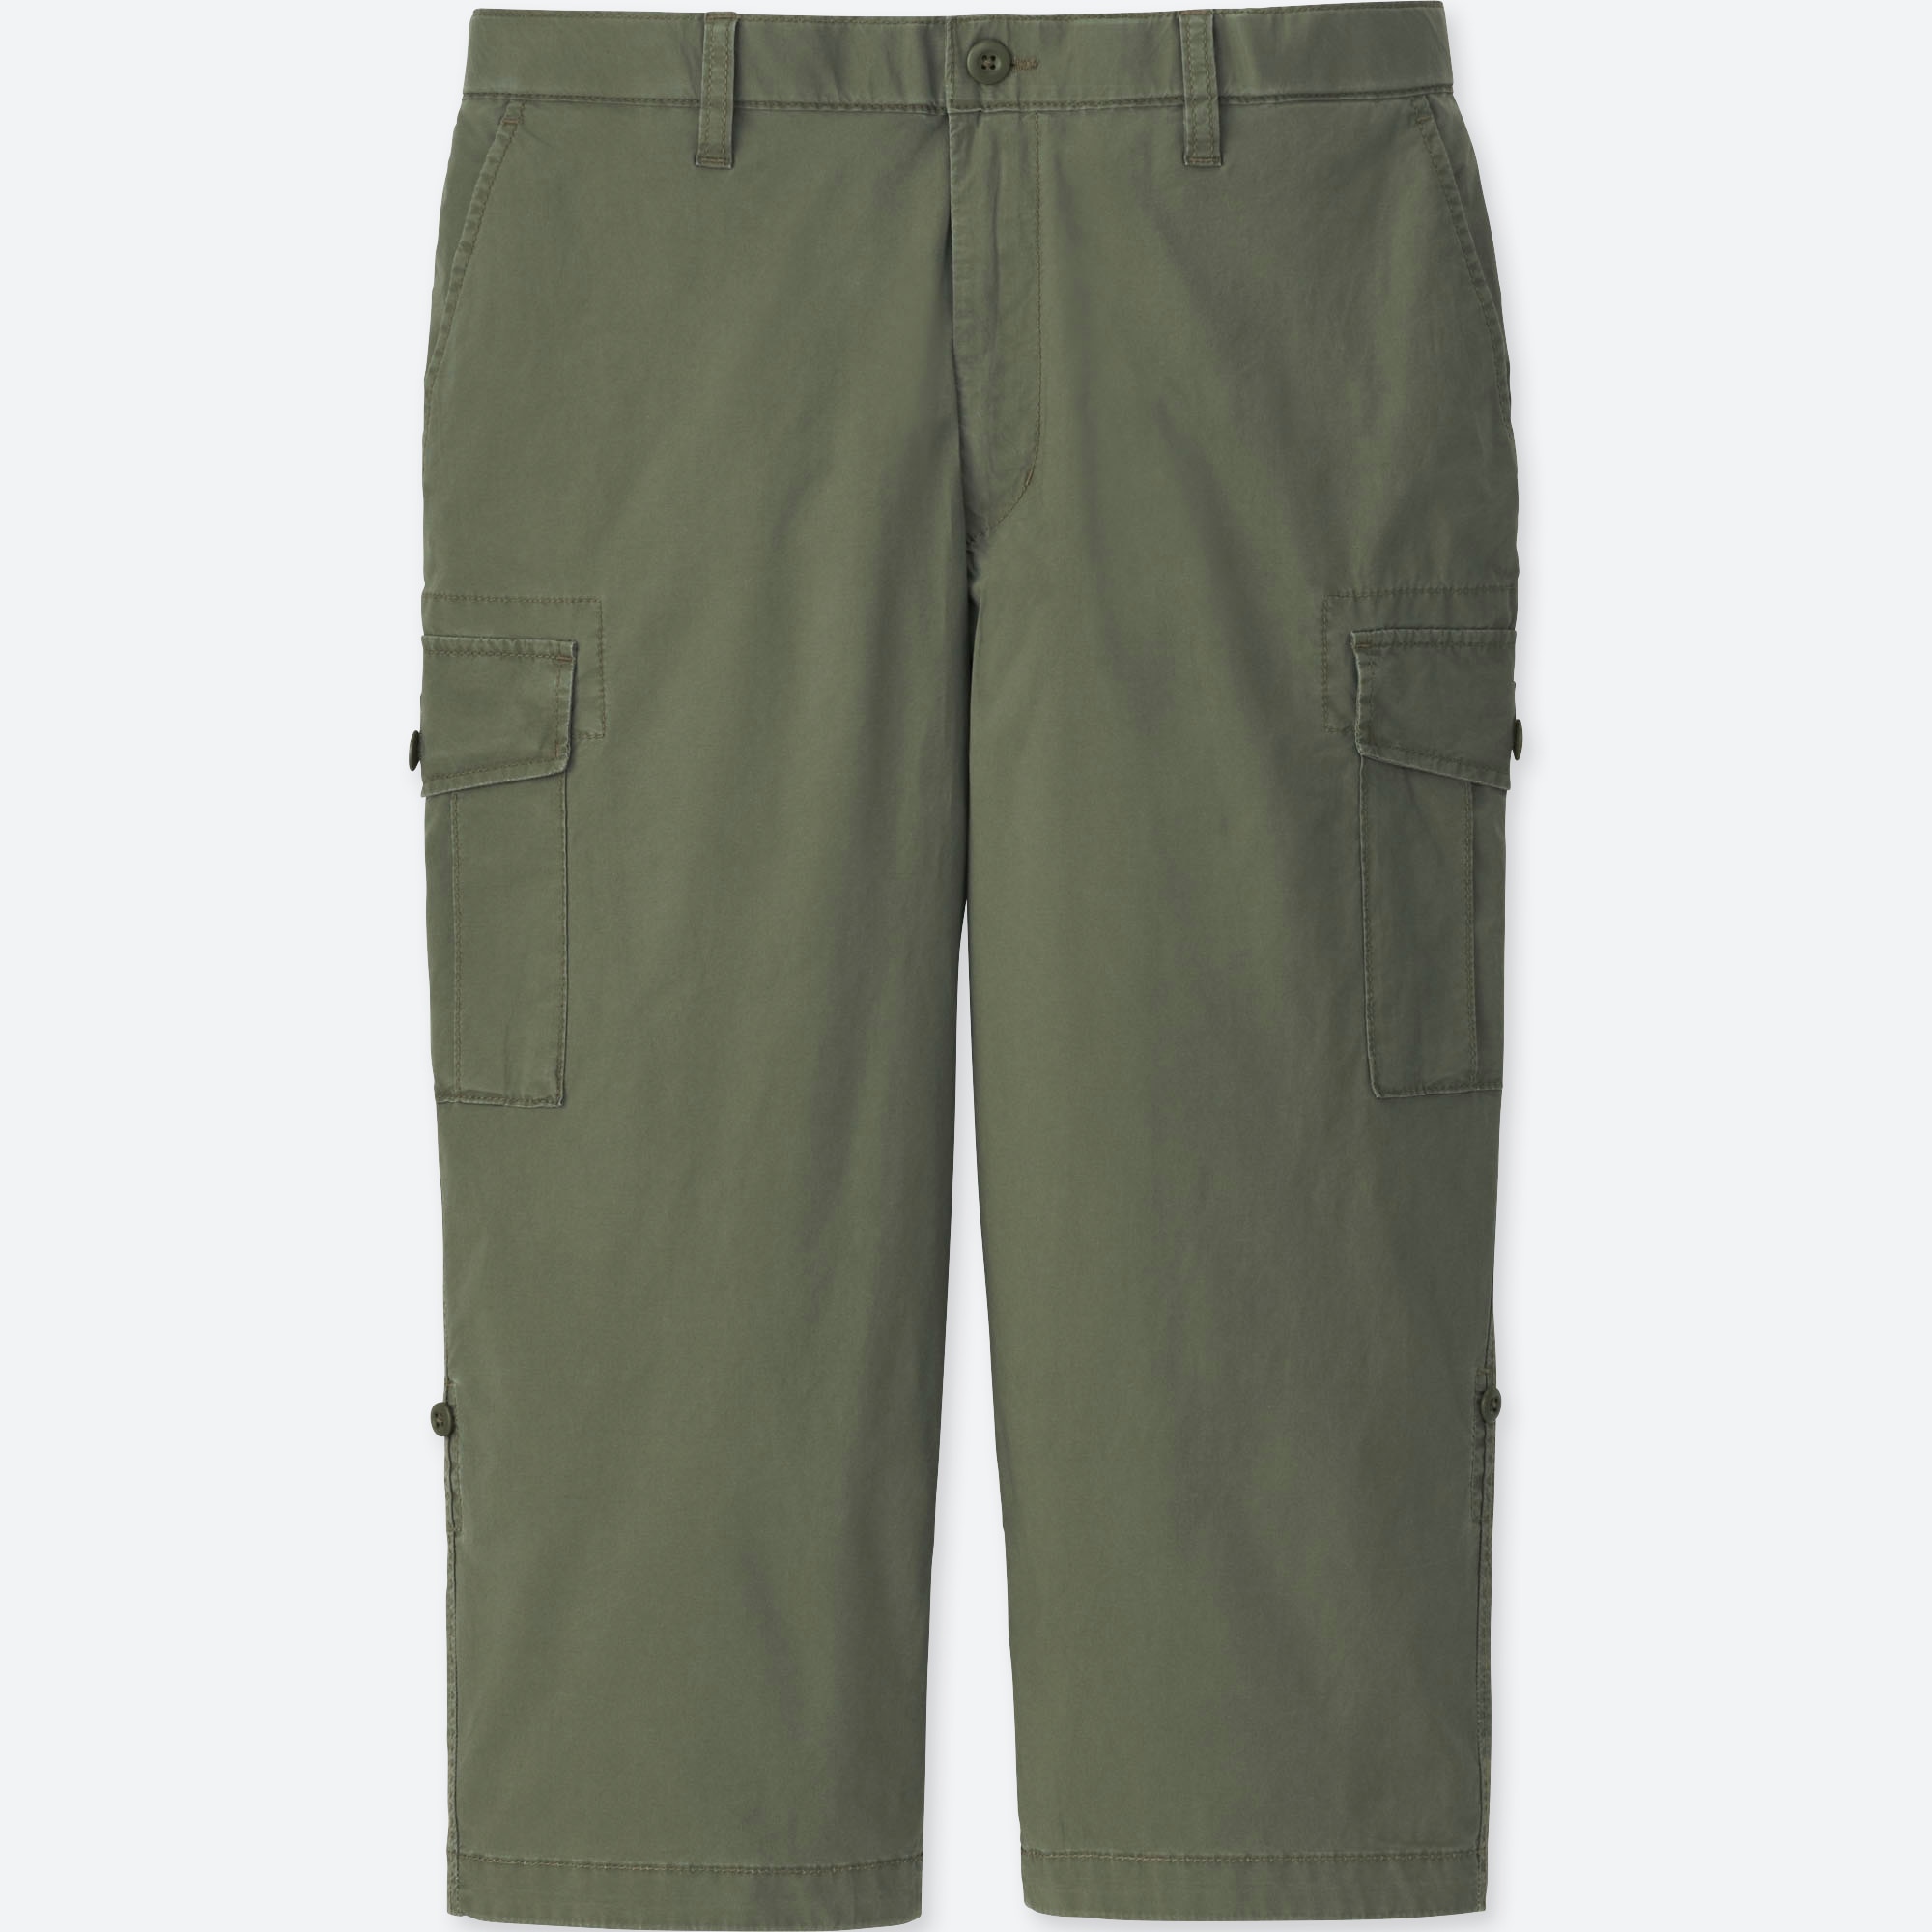 UNIQLO Singapore on Instagram INSTAGRAM EXCLUSIVE Purchase MENs Roll Up  34 Cargo Pants at only 2990   Leggings are not pants Cropped  leggings Women crop